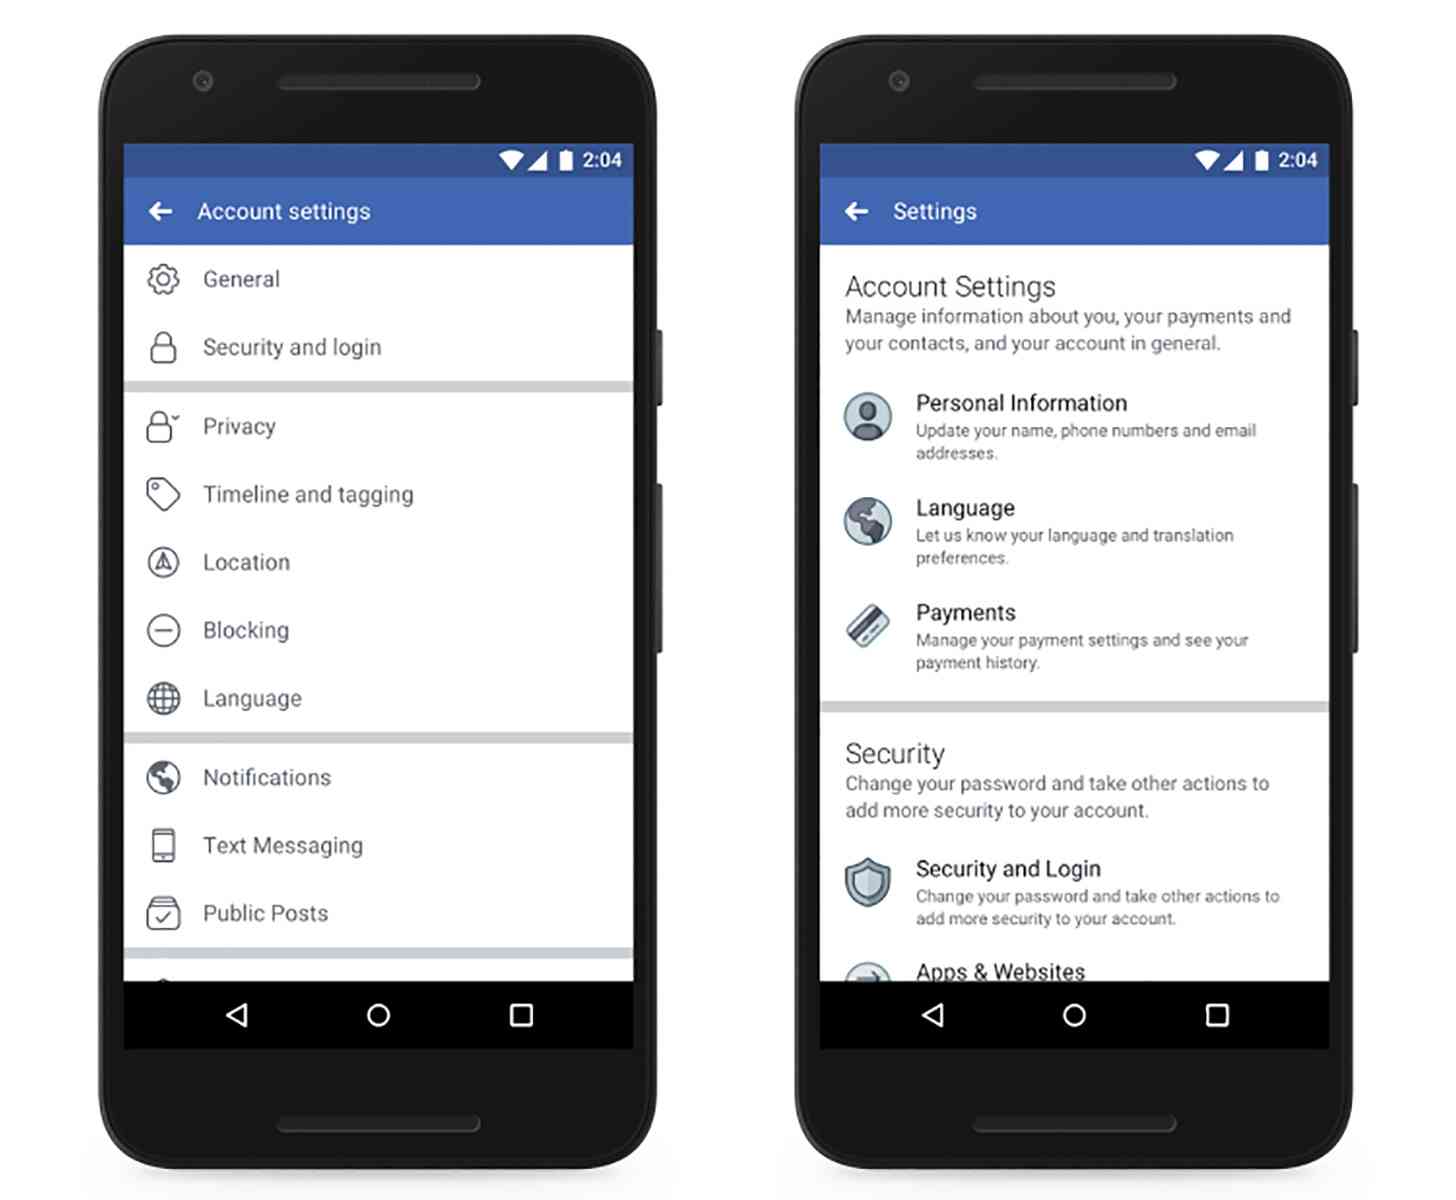 Facebook simplified data privacy settings